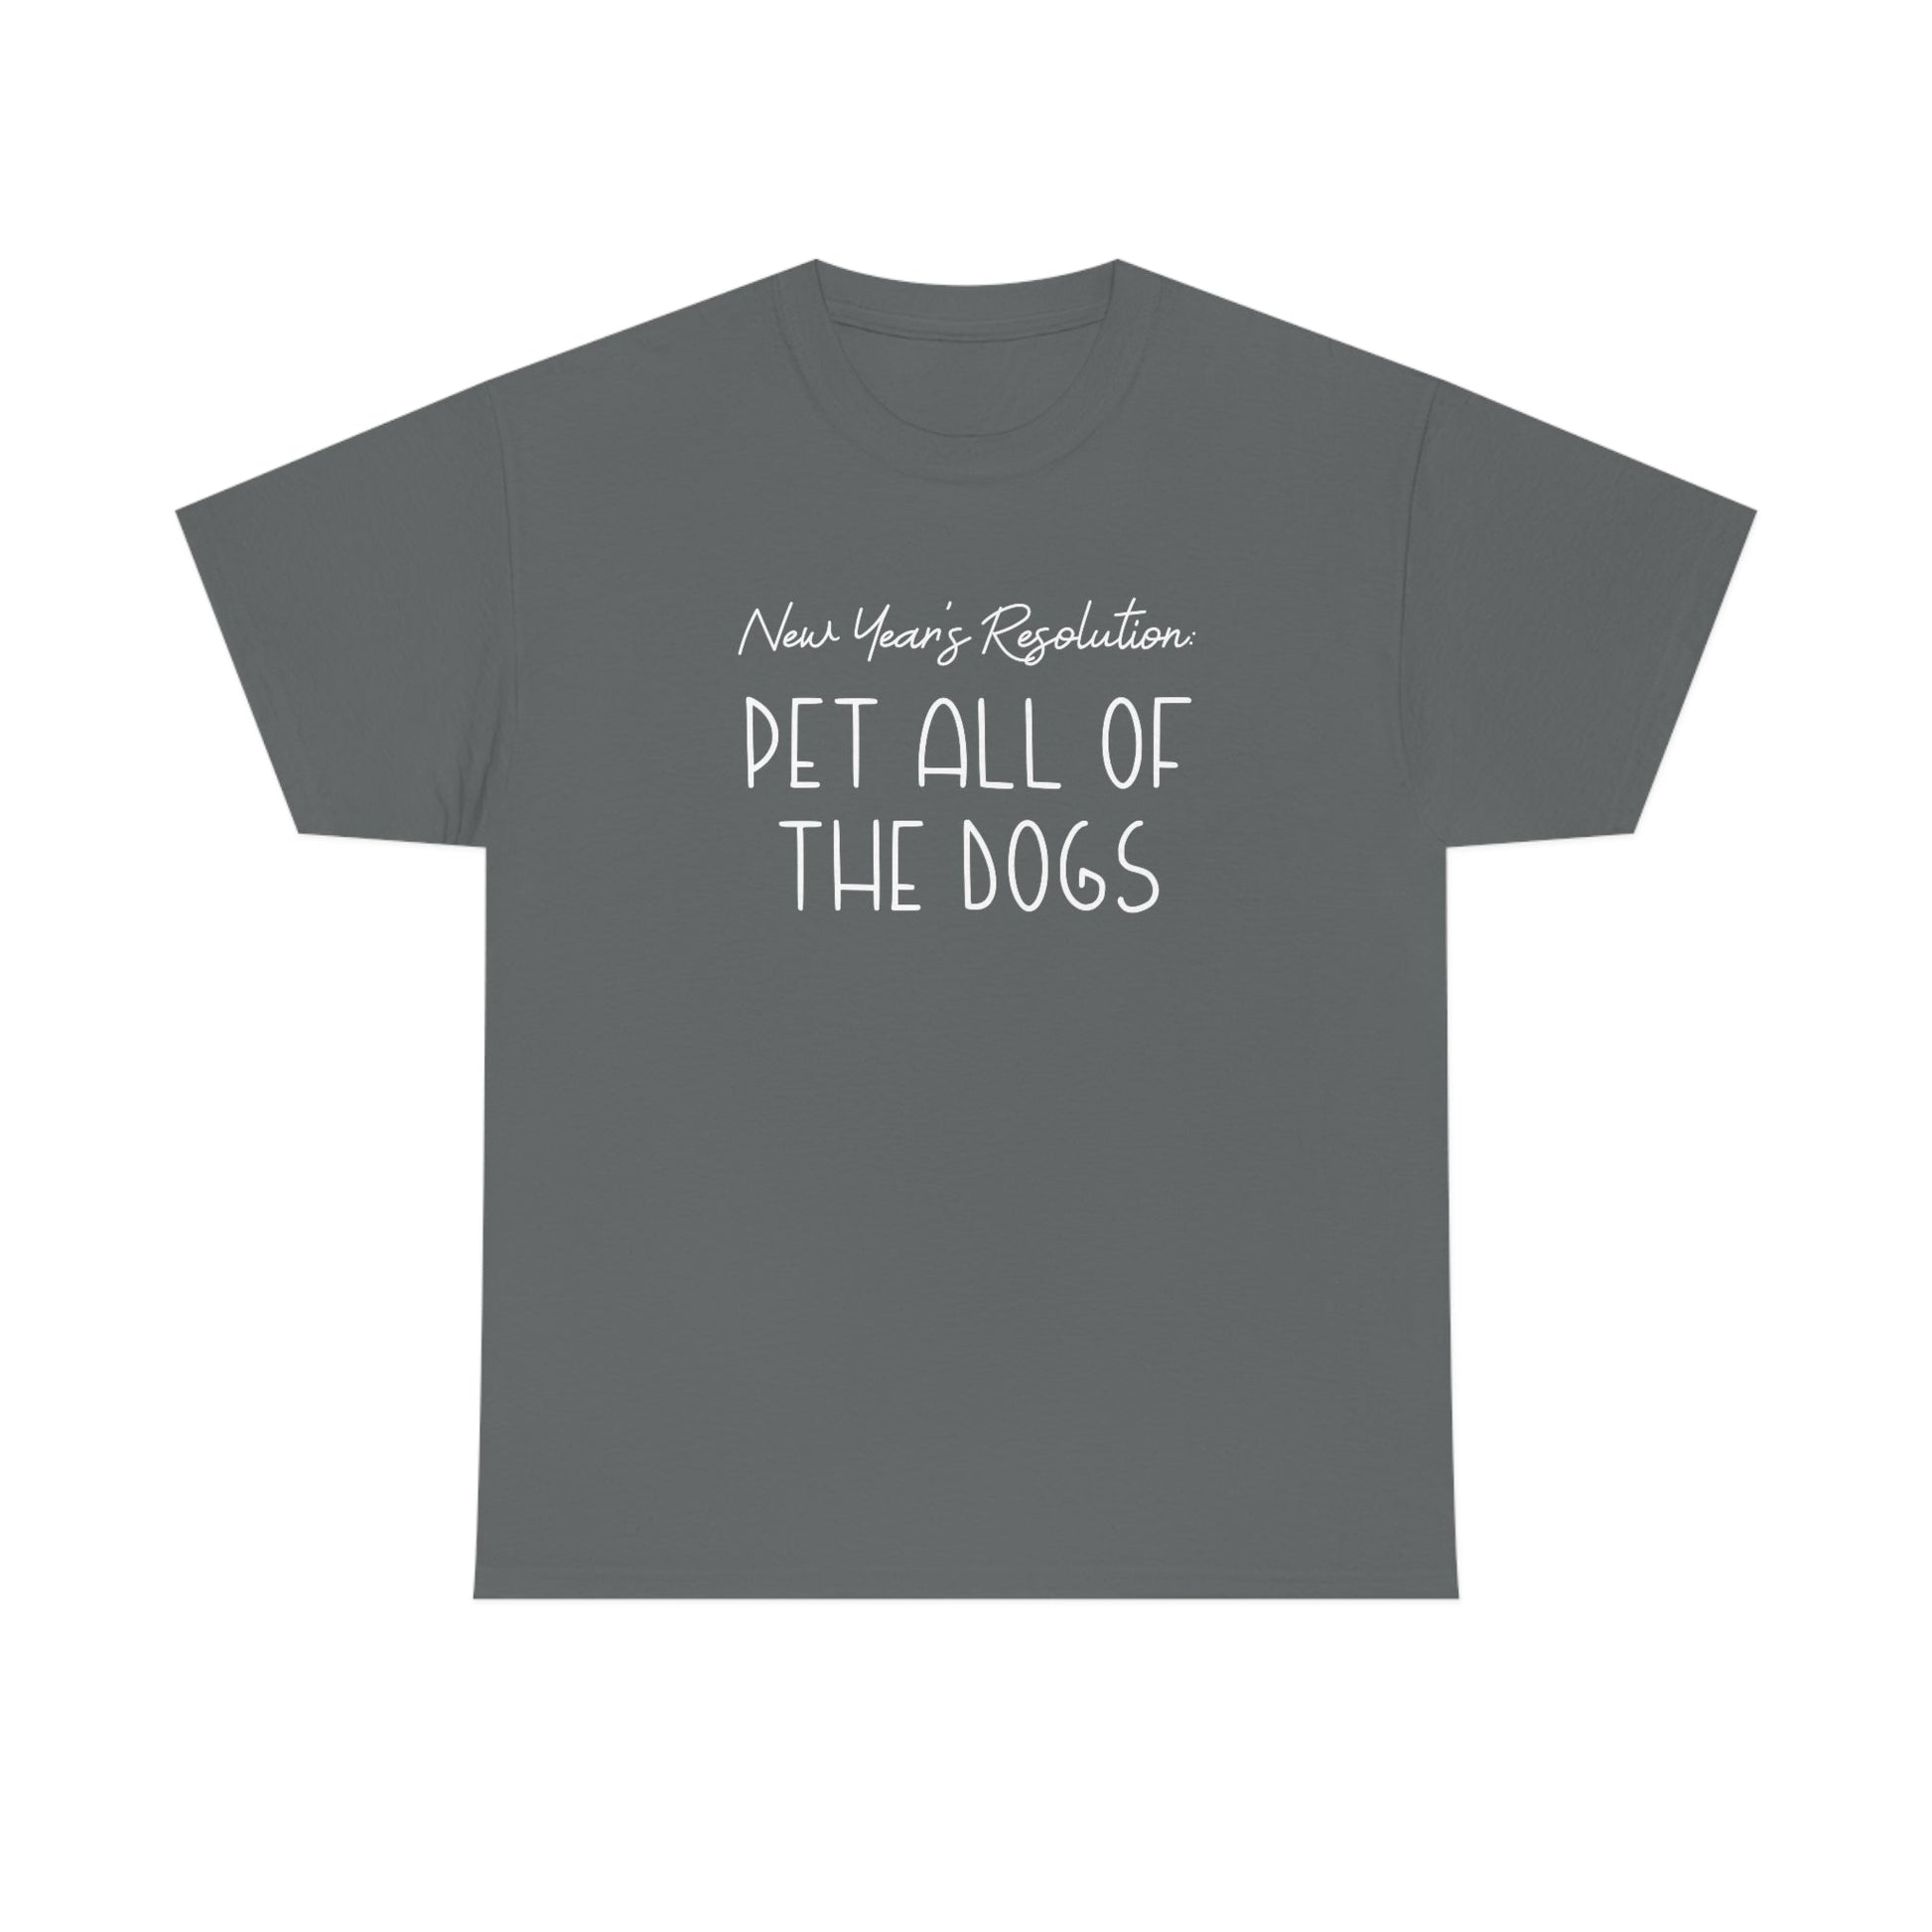 New Year's Resolution: Pet All Of The Dogs | Text Tees - Detezi Designs-41457048359703797416